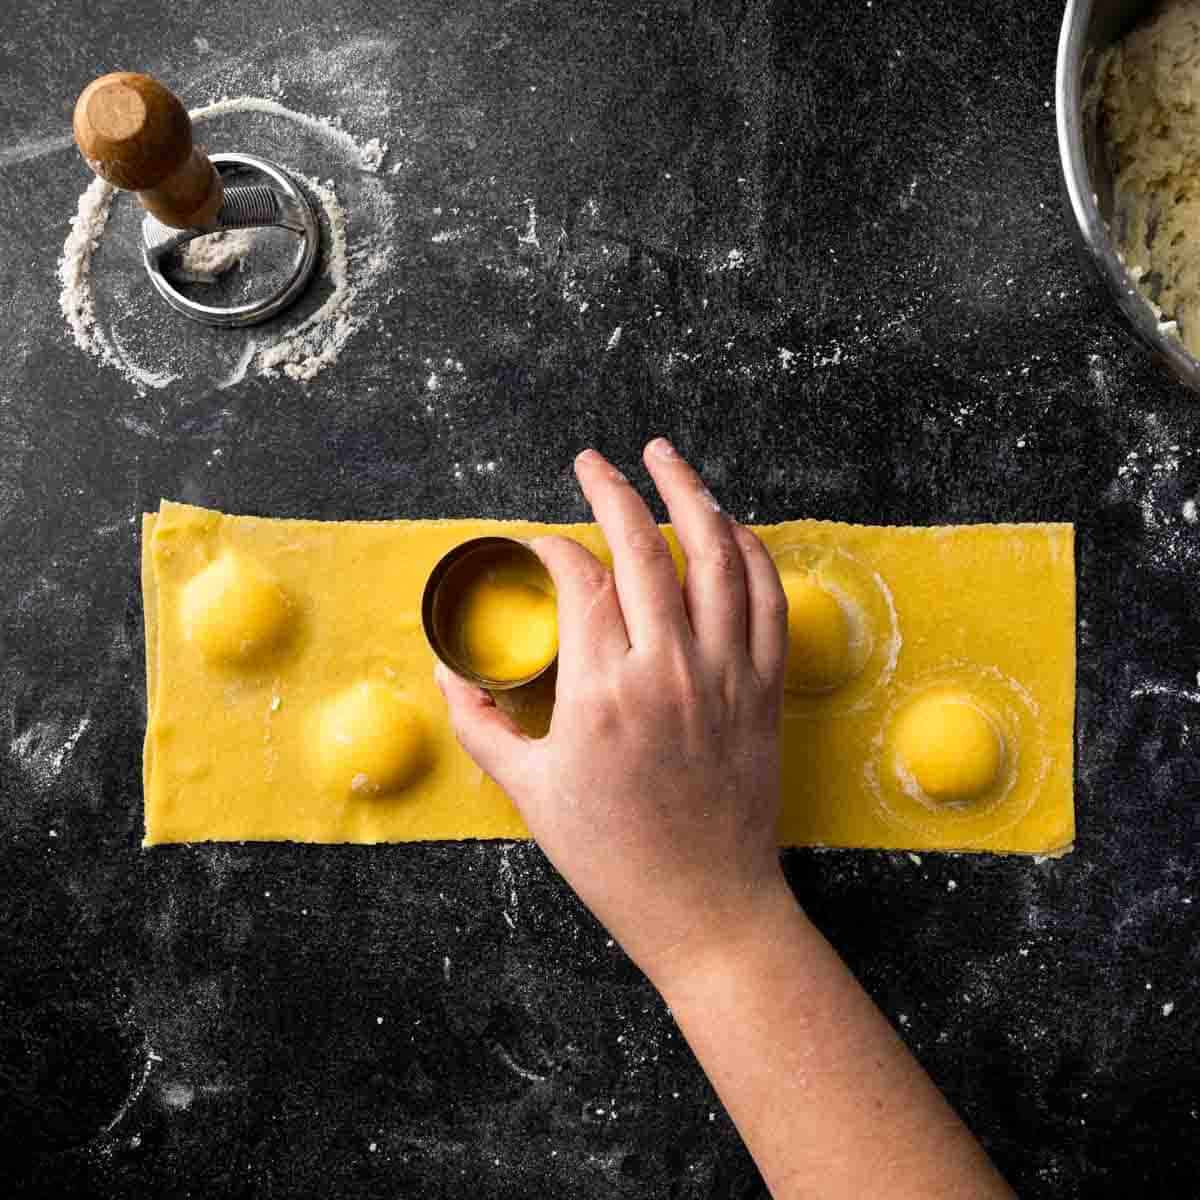 Using a cookie cutter to shape the ravioli filling into a perfect circle.